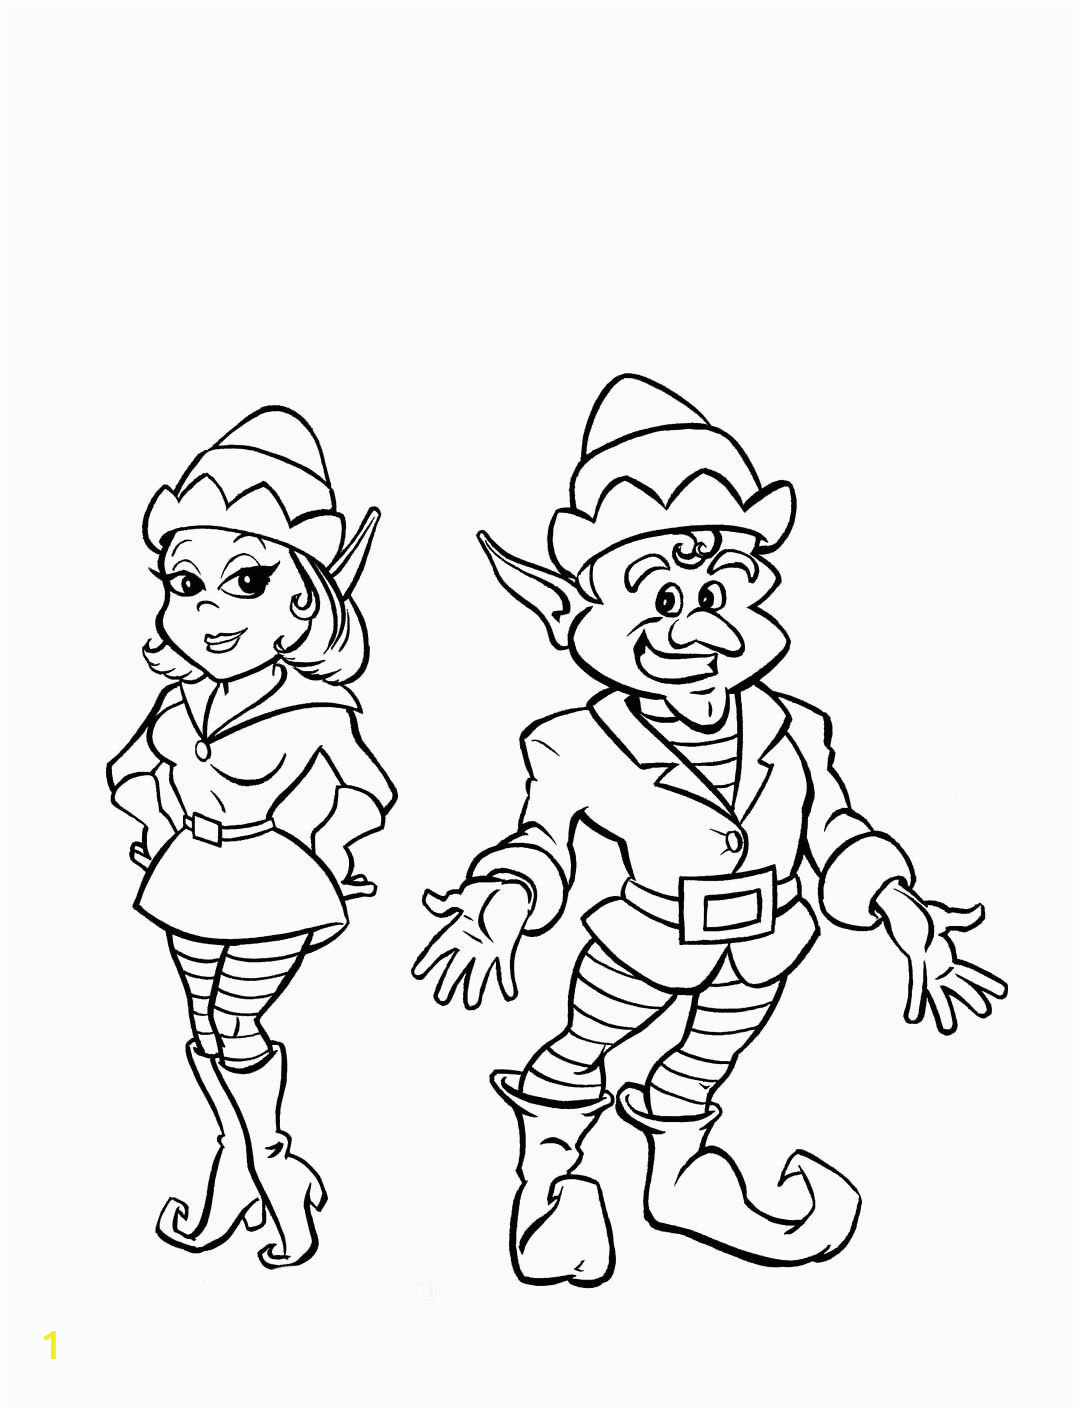 printable girl elf on the shelf coloring pages